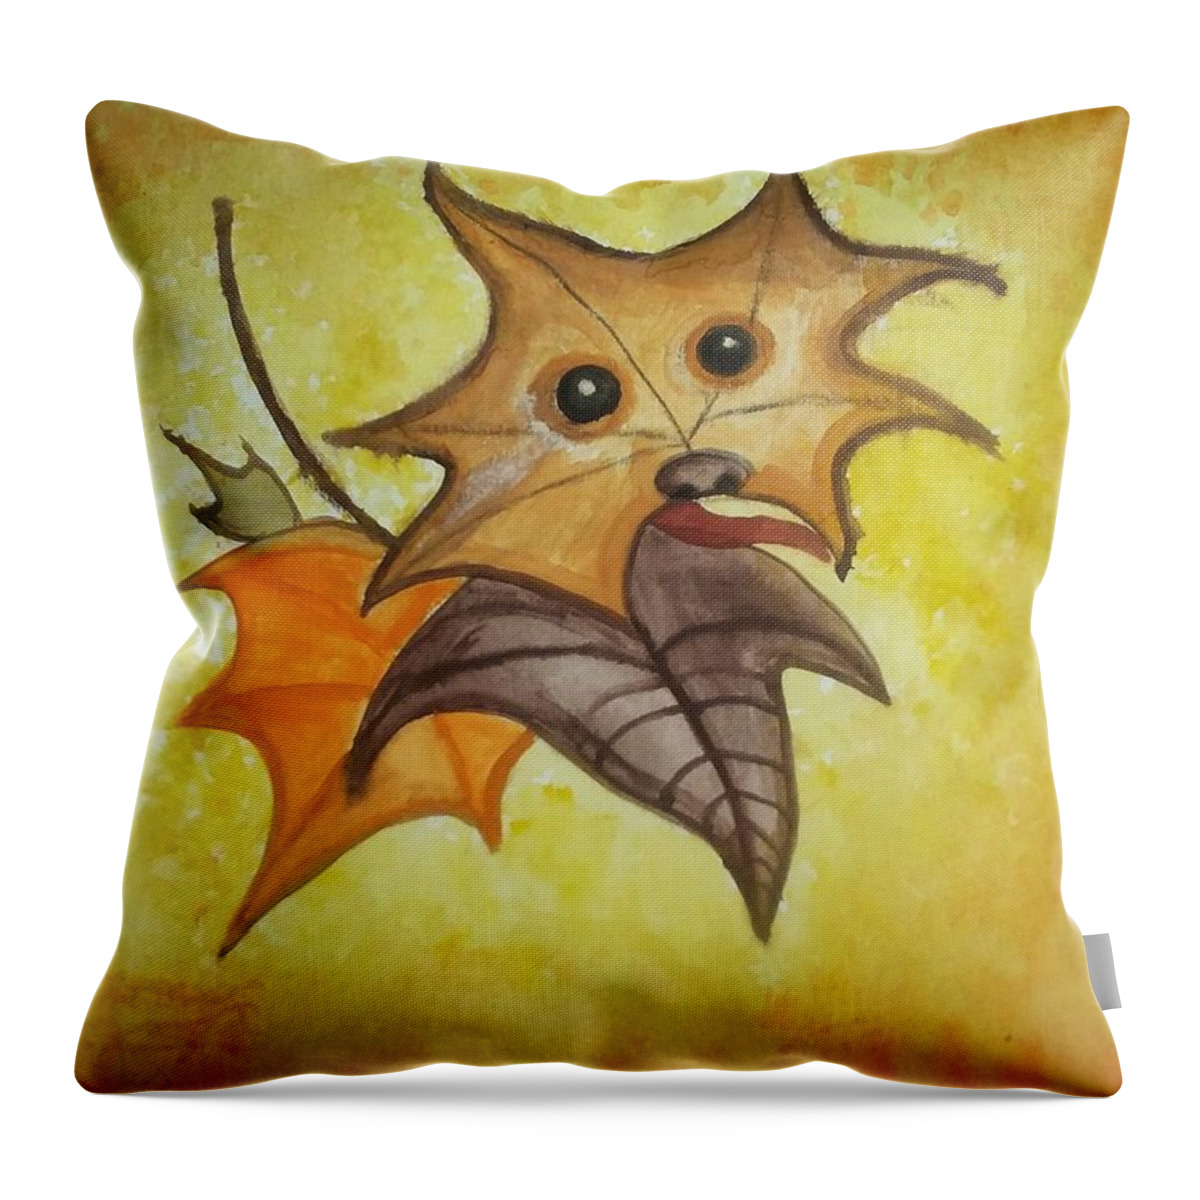 Fantasy Art Throw Pillow featuring the painting Leaf Puppy 2 by Vale Anoa'i